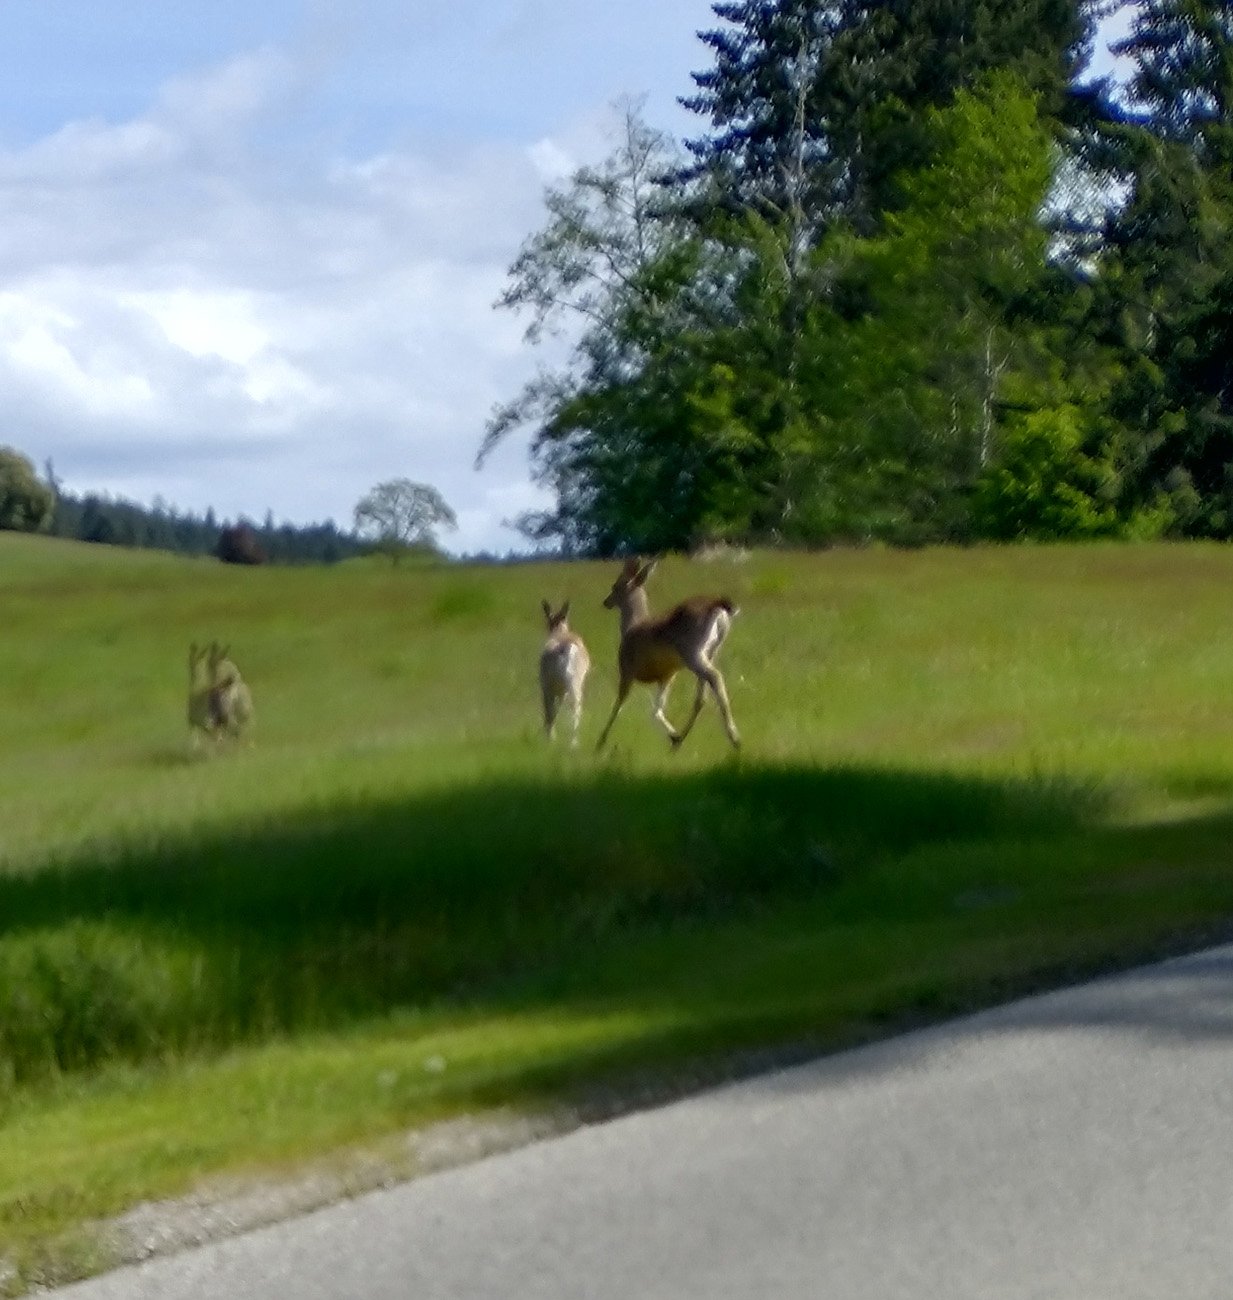 Tried to take a pic while moving as the deer were crossing. Almost..almost. 